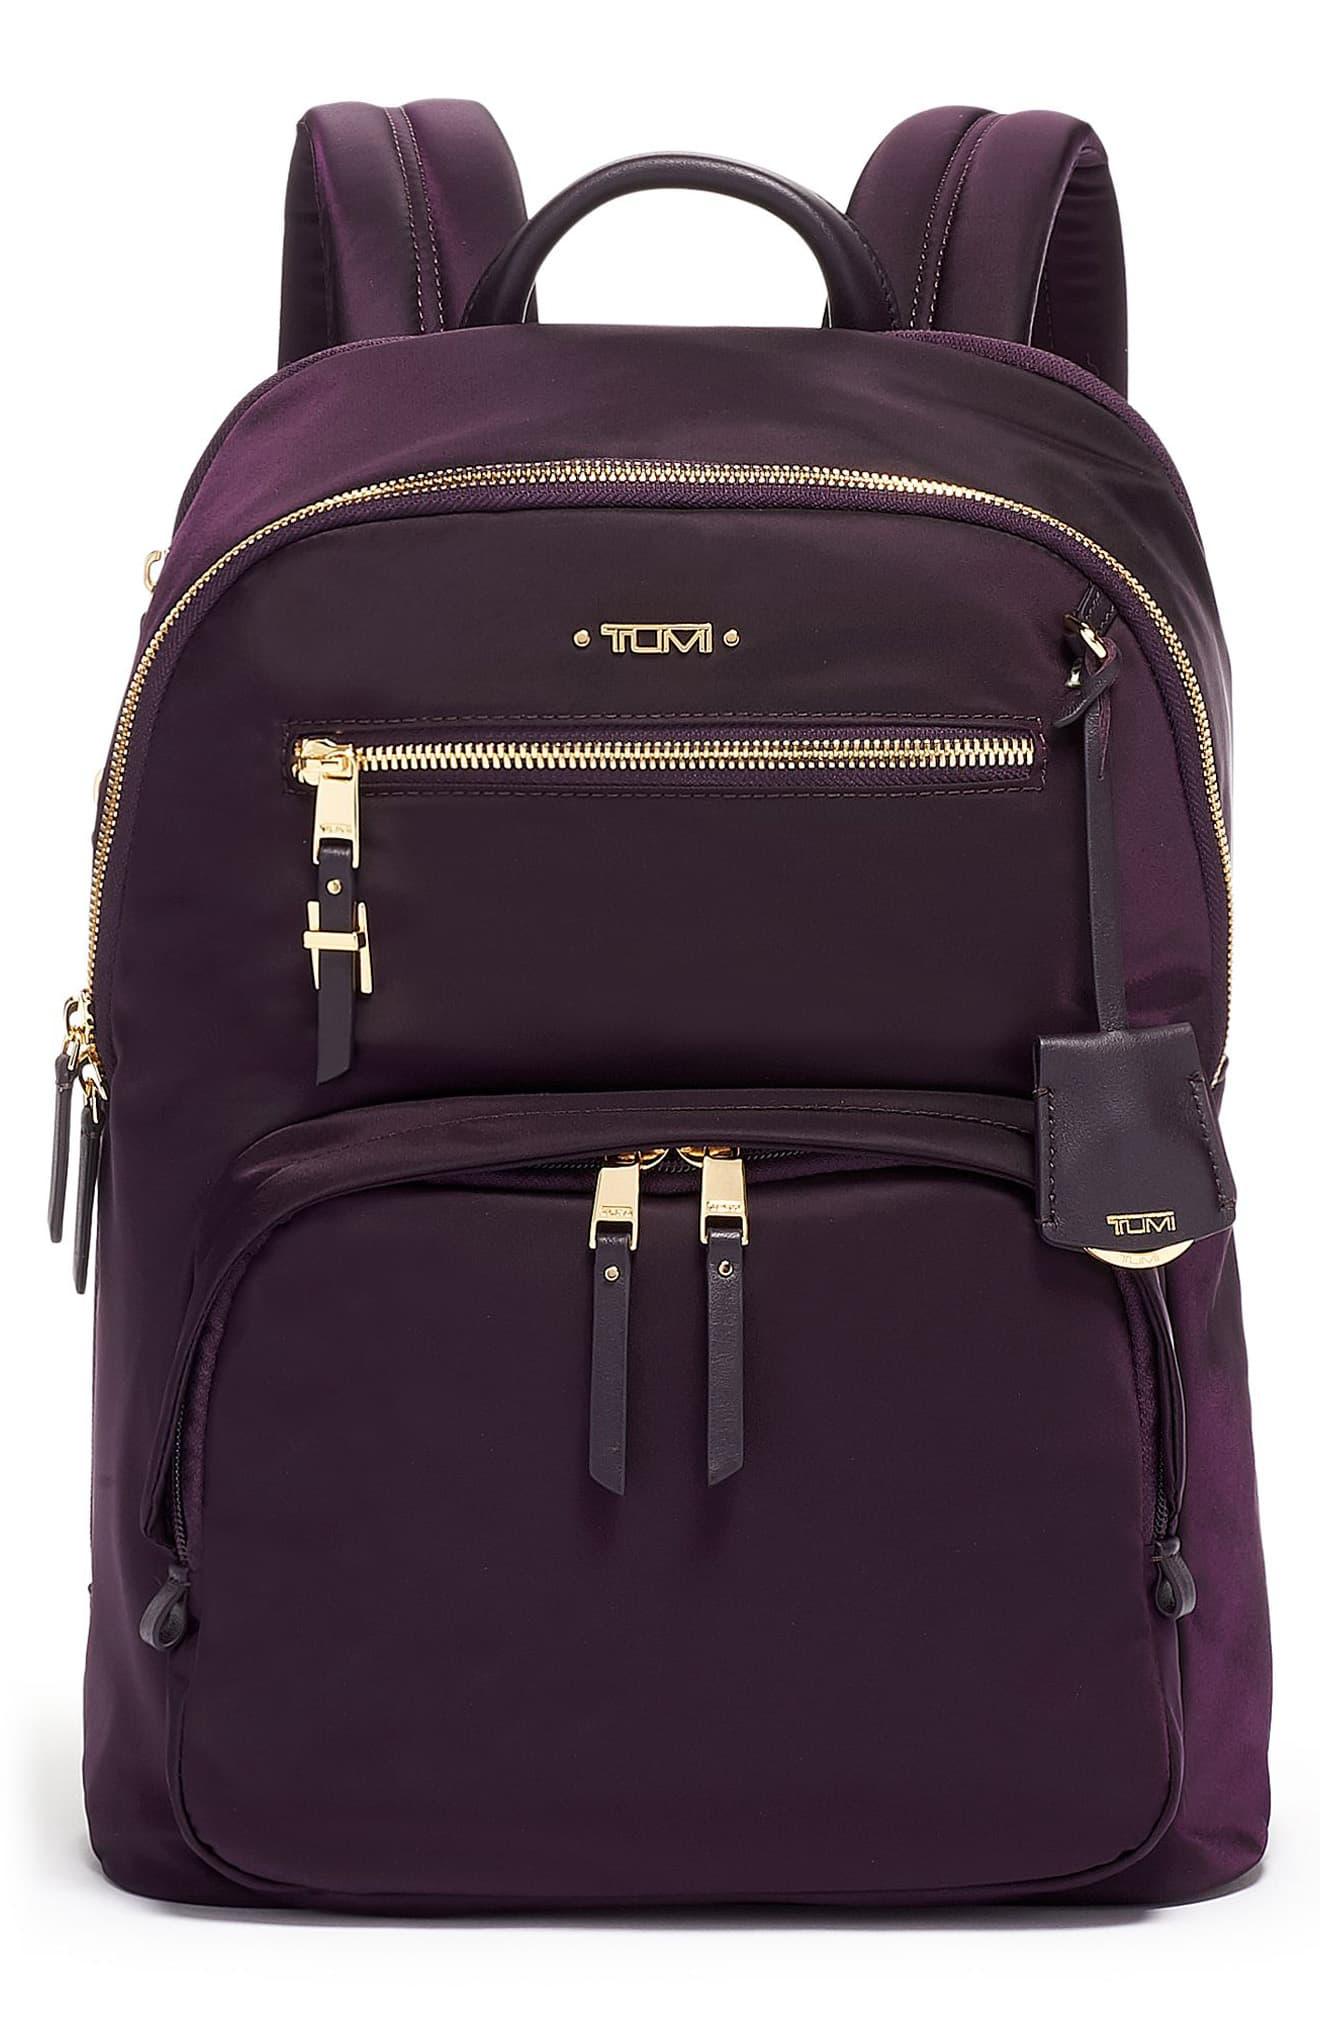 Tumi Leather Voyageur Hilden Backpack - Purple - Lyst